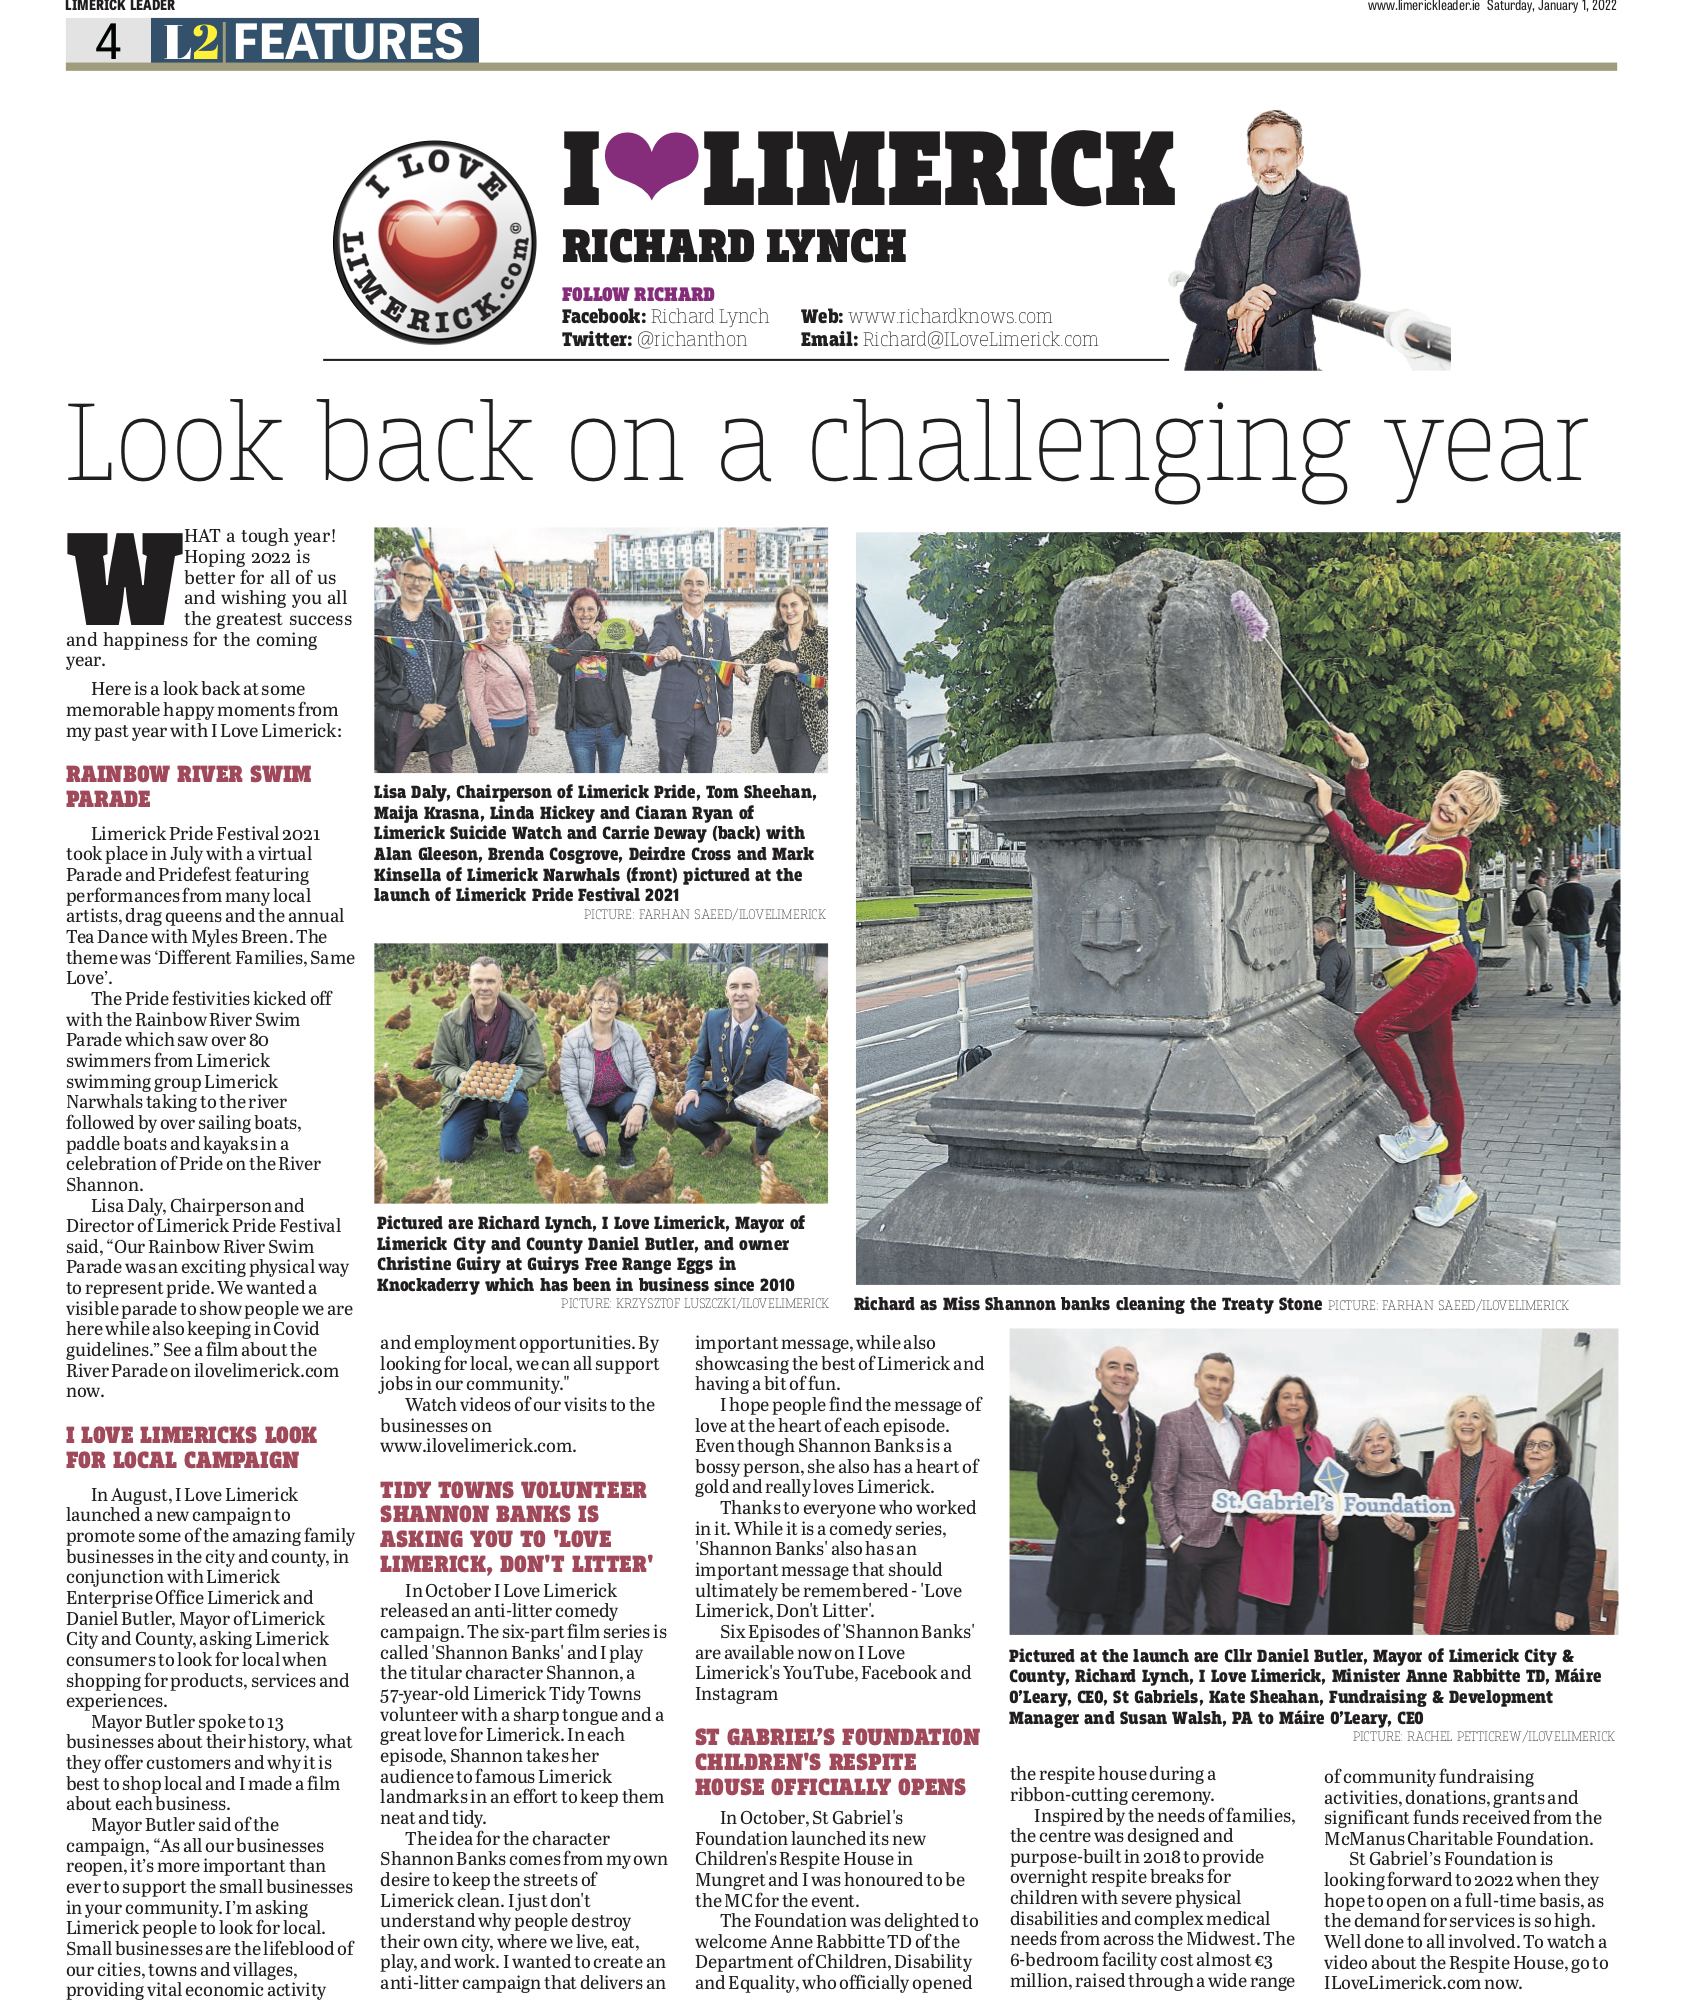 The Leader Column January 1 2022 - Looking Back on a Challenging Year